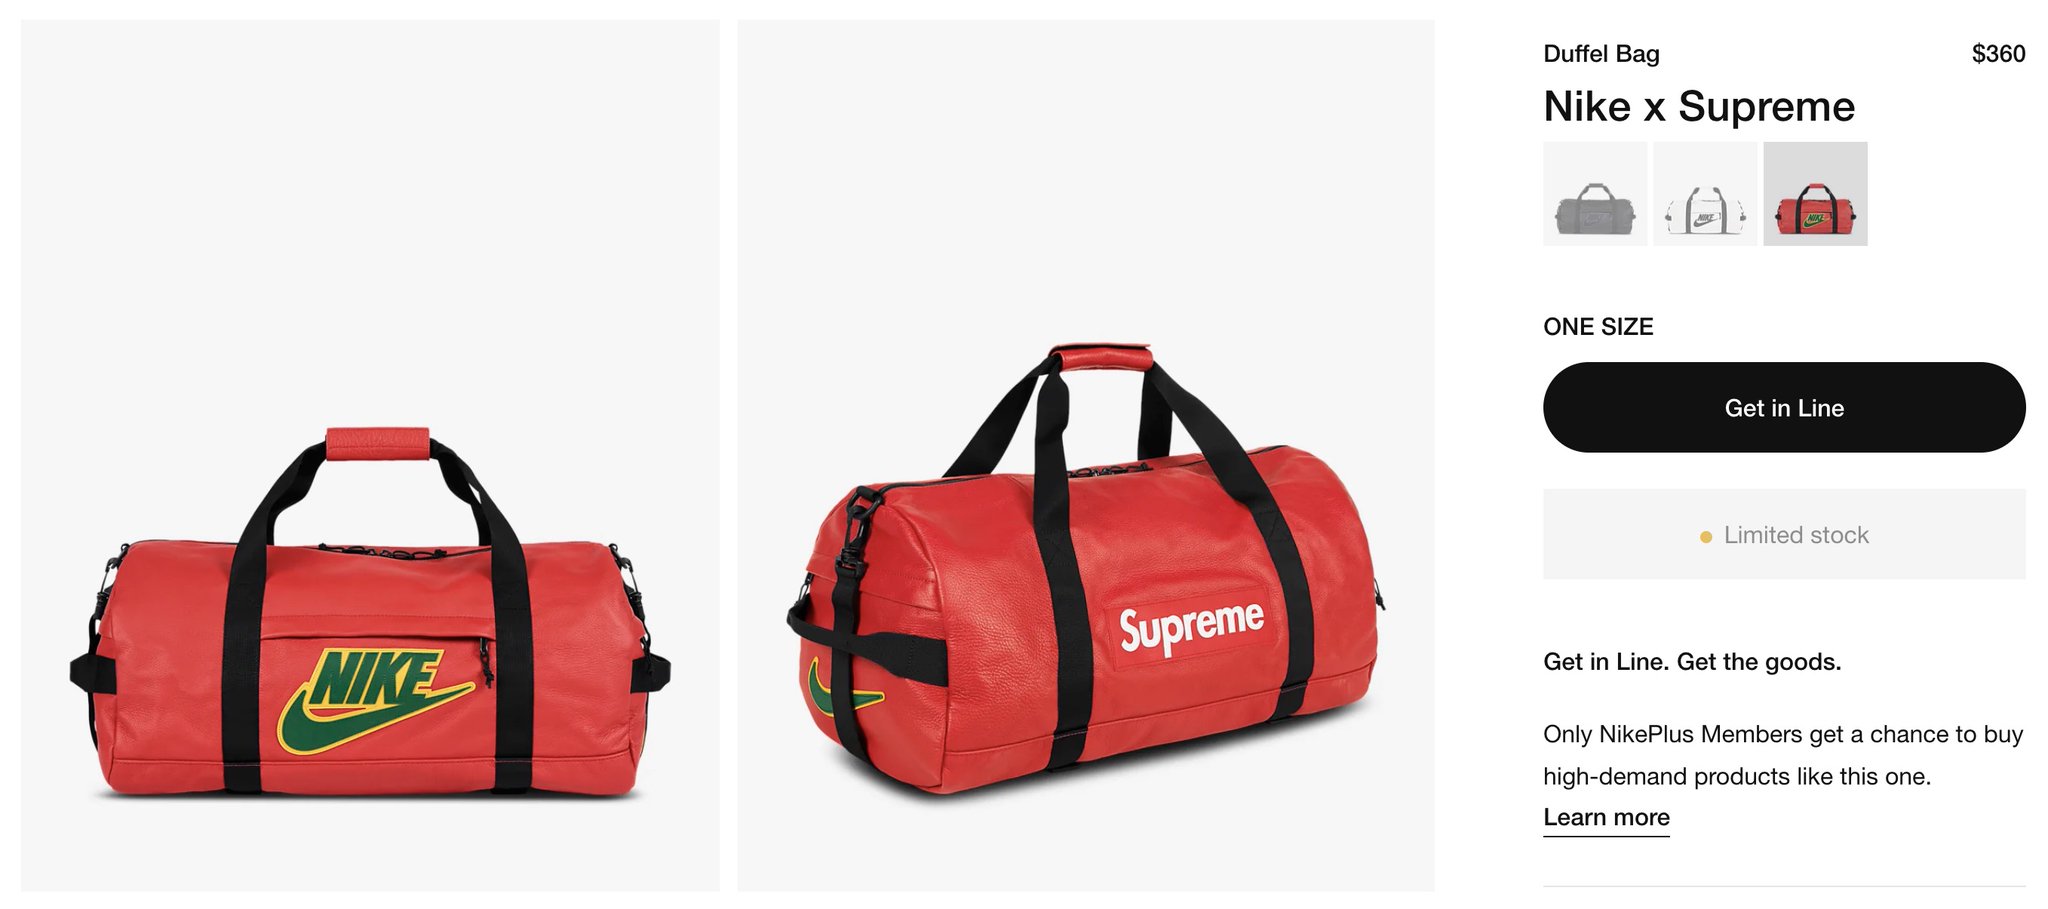 ozono átomo Cuando J23 iPhone App on Twitter: "Get in Line: Nike x Supreme Duffle Bag Link  -&gt; https://t.co/W5mB0p9bR9 https://t.co/h8UCGilM0L" / Twitter